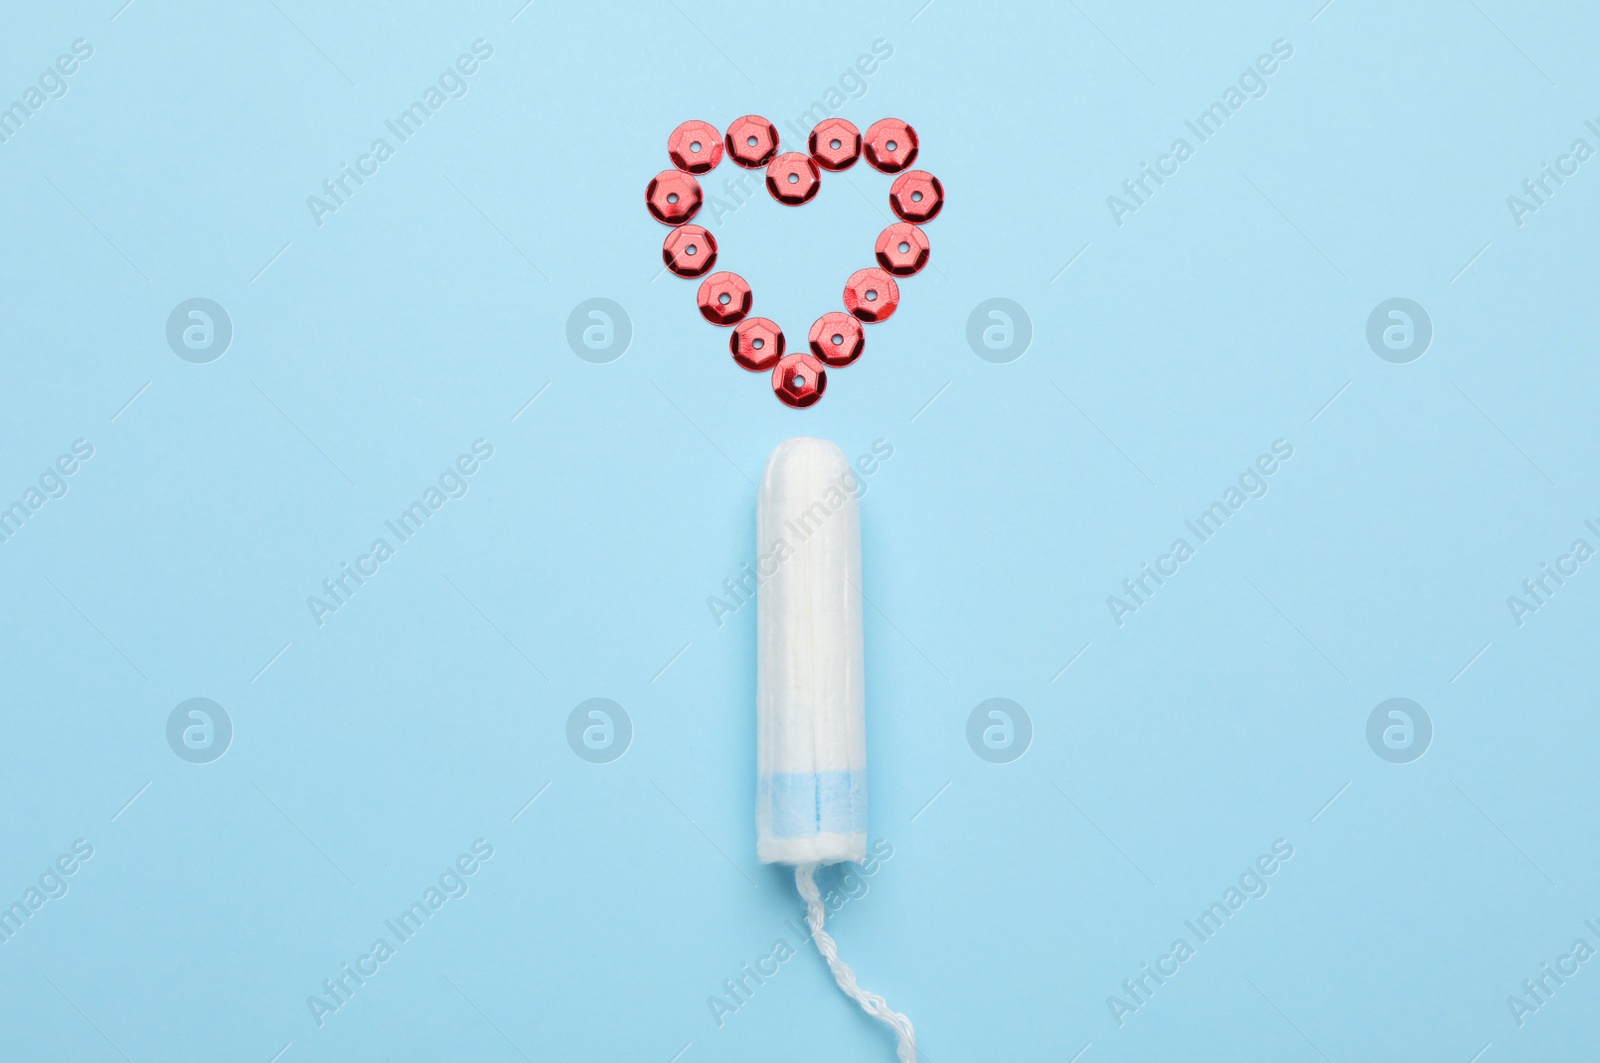 Photo of Tampon near heart made of red sequins on light blue background, flat lay. Menstrual hygiene product